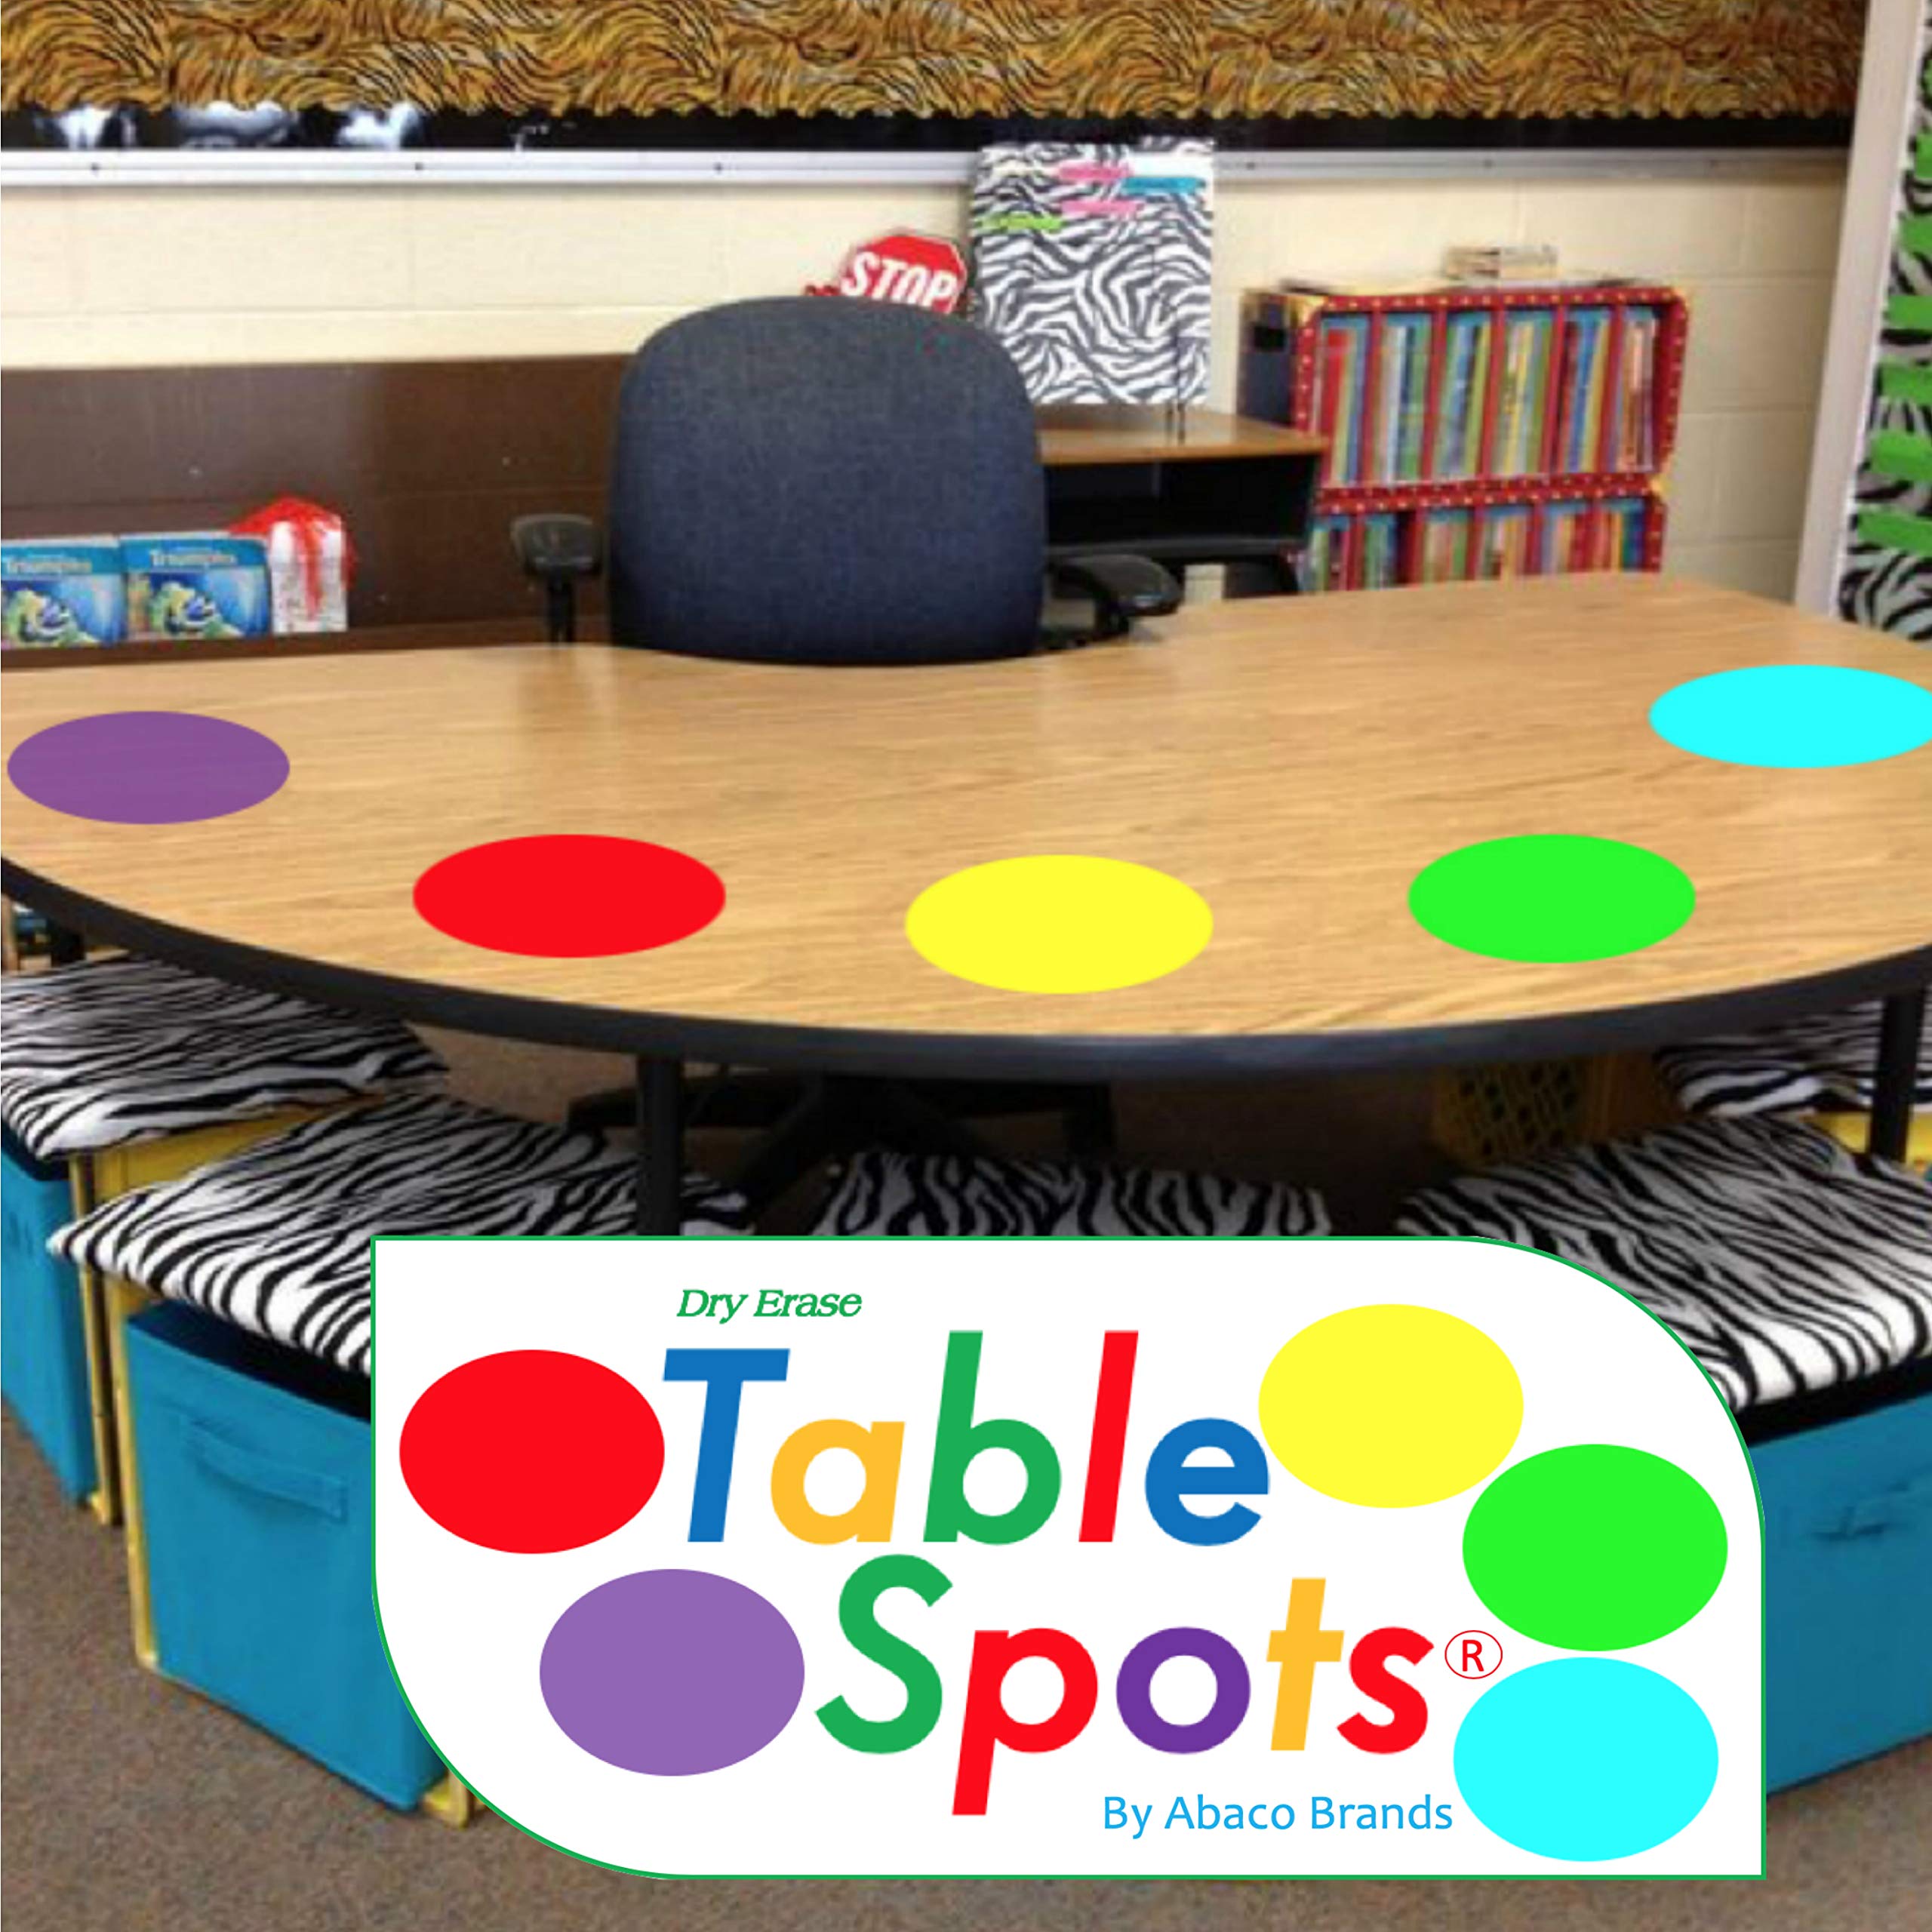 Book Cover New Larger Size! | The Original Table Spots for Teachers | No Staining, No Shadowing, Complete Erase! Dry Erase, 10 Pack Multicolor Circles, Wall Stickers, Decals